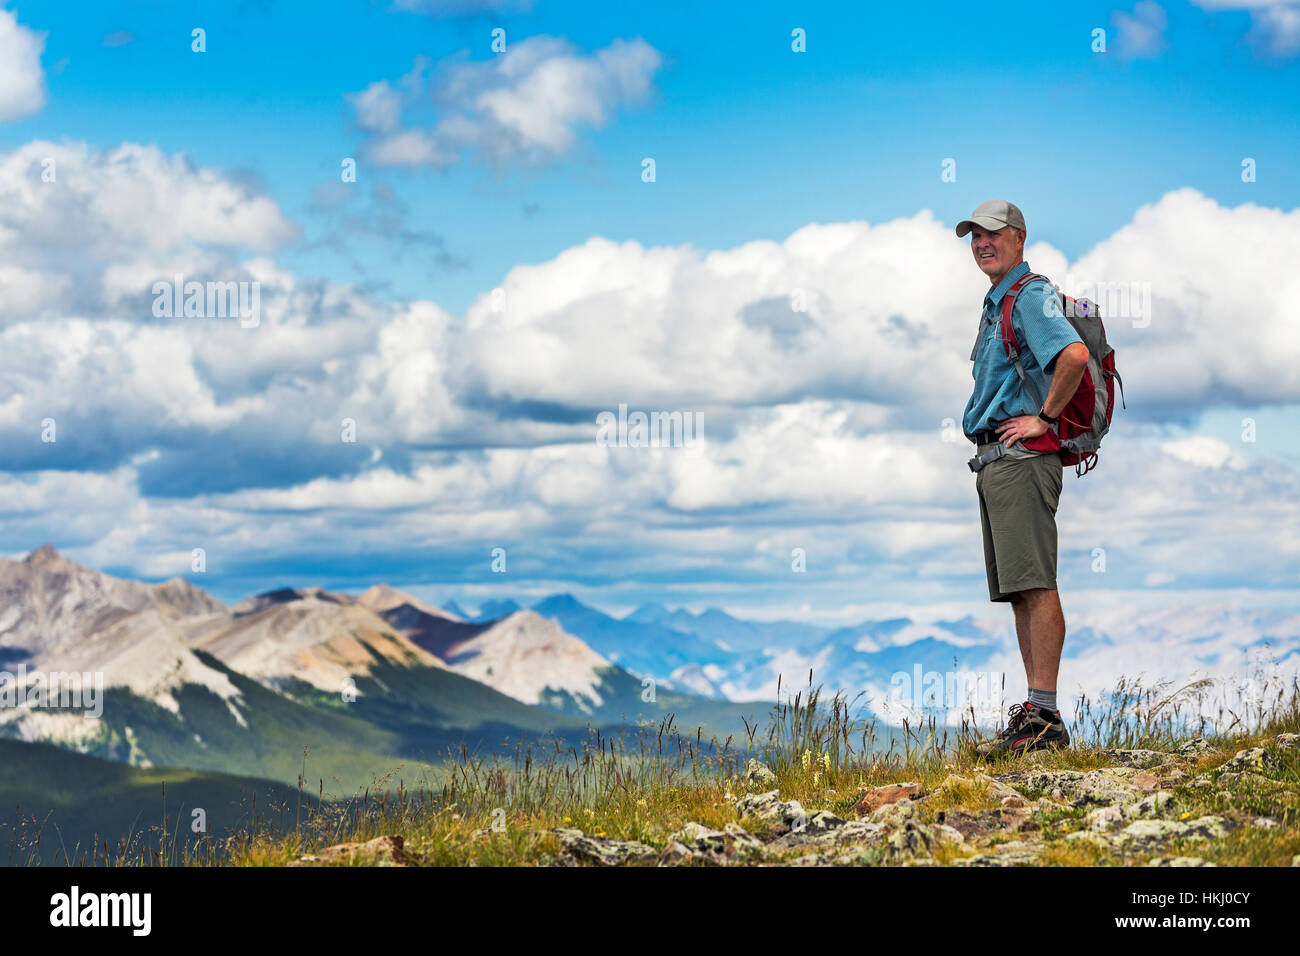 Male hiker standing on top of rocky hill overlooking mountain range and valley with blue sky and clouds, West of Bragg Creek; Alberta, Canada Stock Photo